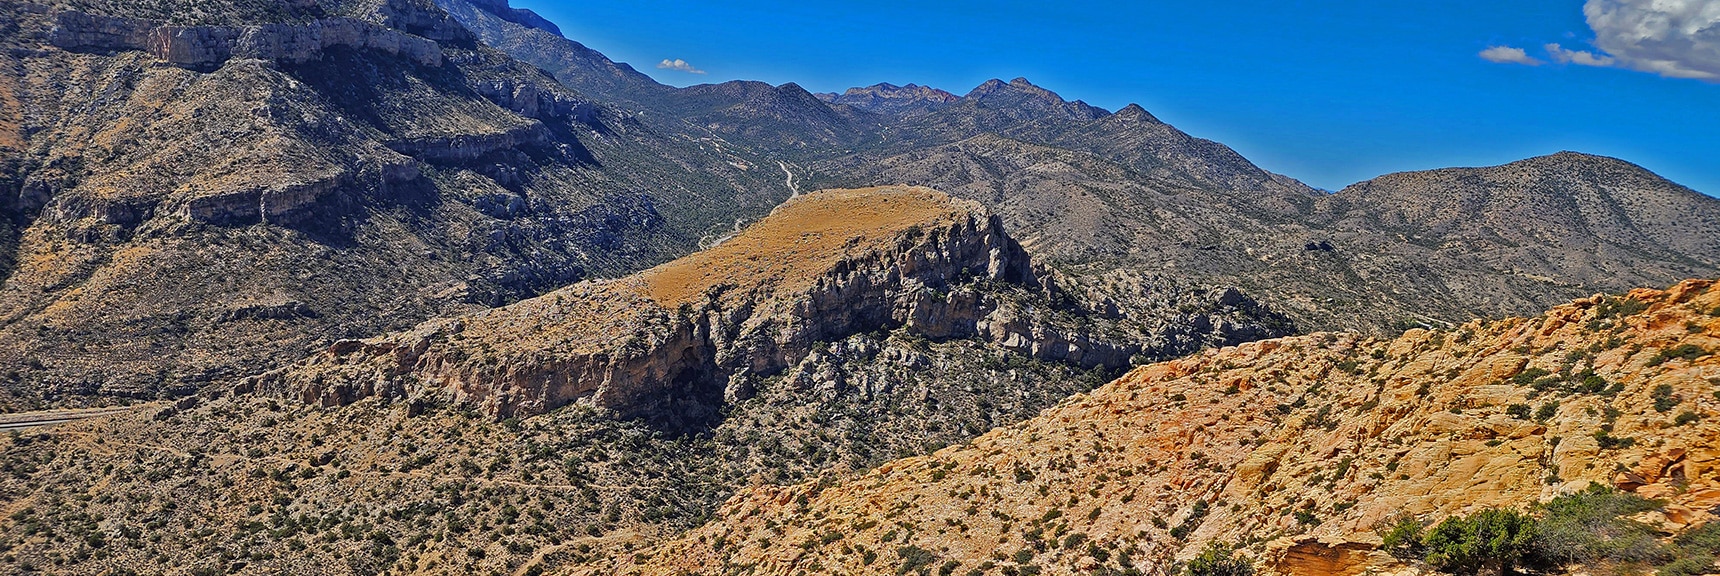 "South of South Peak" from Another Angle. | Hollow Rock Peak | Rainbow Mountain Wilderness, Nevada